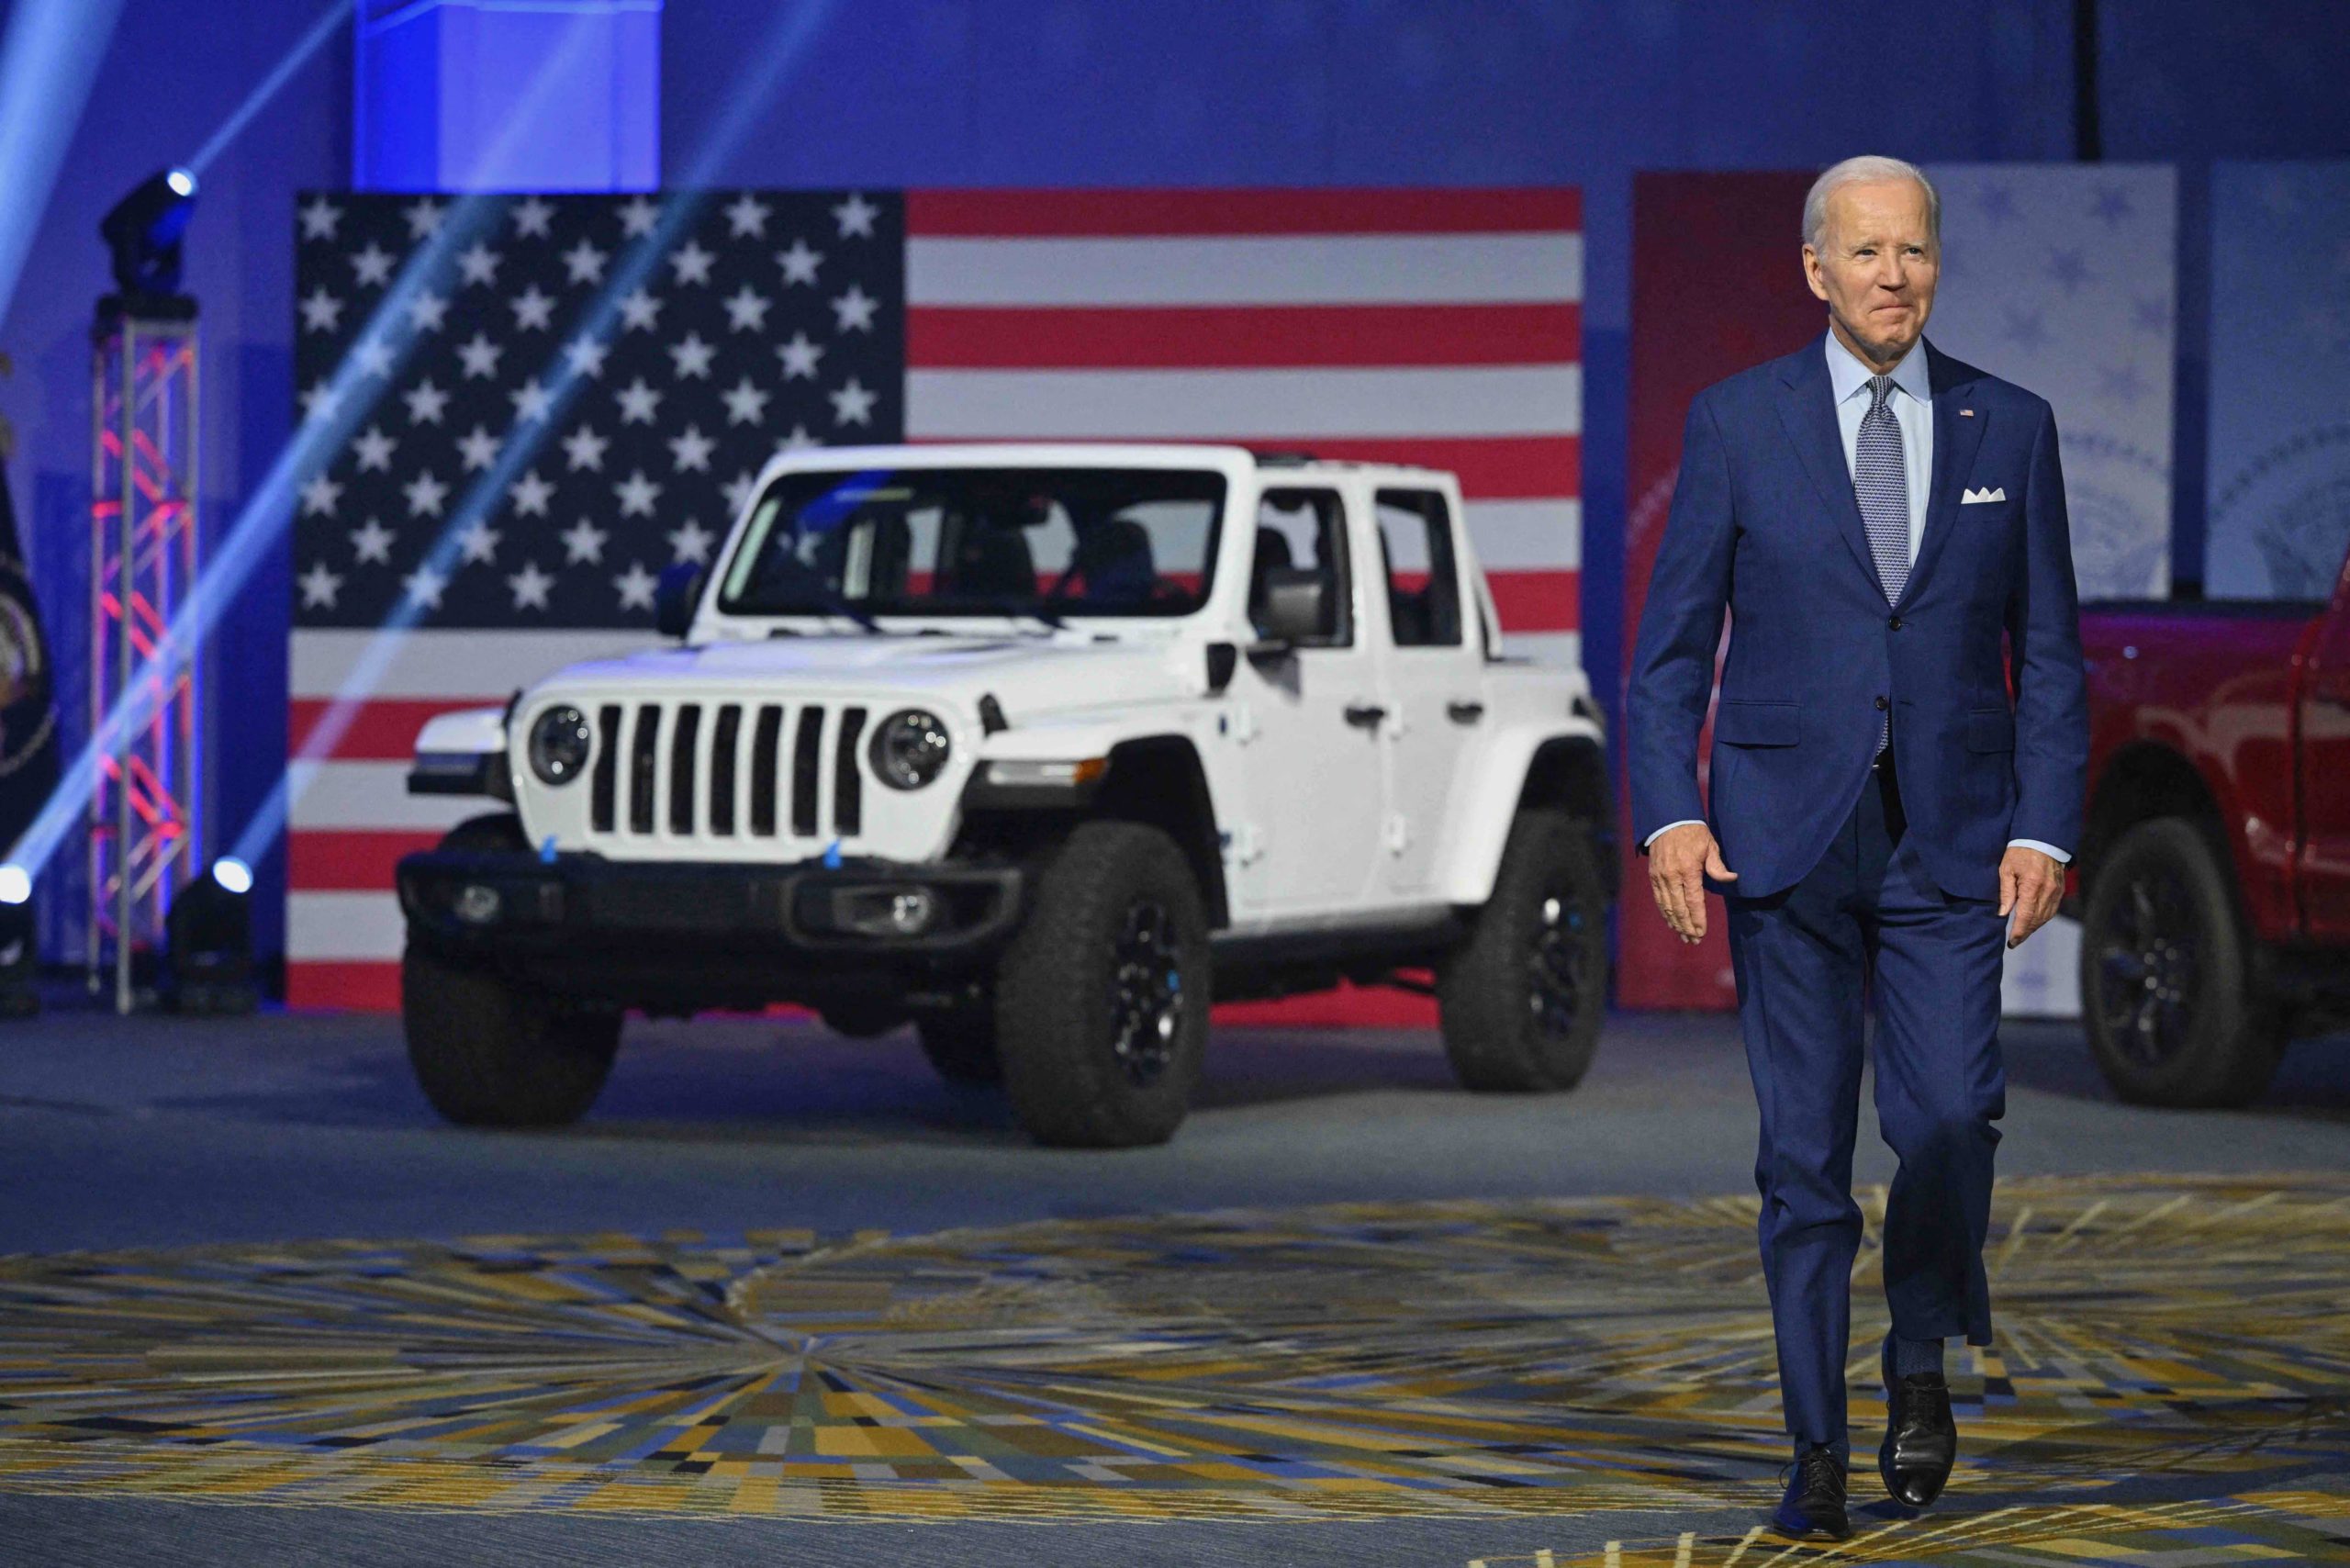 US President Joe Biden arrives to speak at the 2022 North American International Auto Show in Detroit, Michigan, on September 14, 2022. - Biden is visiting the auto show to highlight electric vehicle manufacturing. (Photo by MANDEL NGAN/AFP via Getty Images)